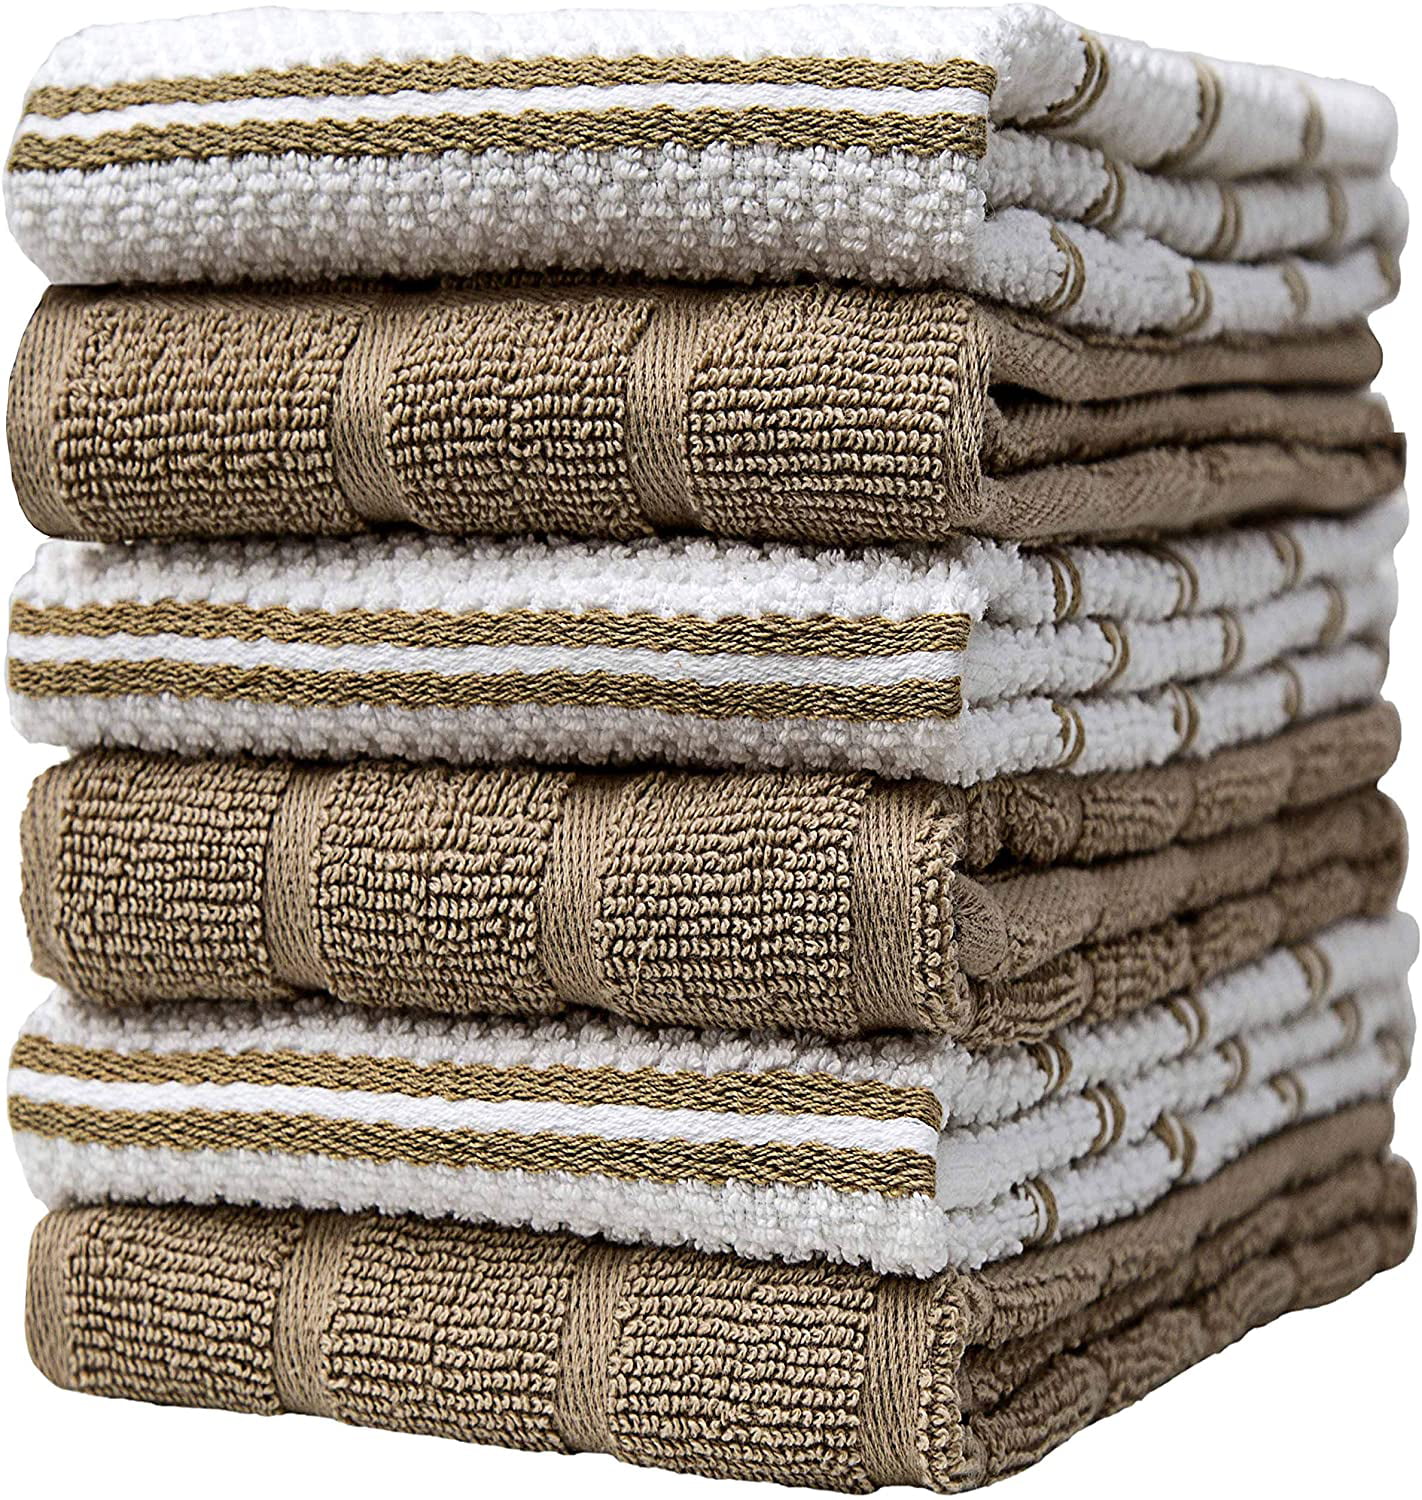 16 x 28 6 Pack Natural Ring Spun Cotton Bumble Premium Cotton Kitchen Towels Highly Absorbent with Hanging Loop 380 GSM Decorative Set Soft Large Tea Towel Set Red Check Design